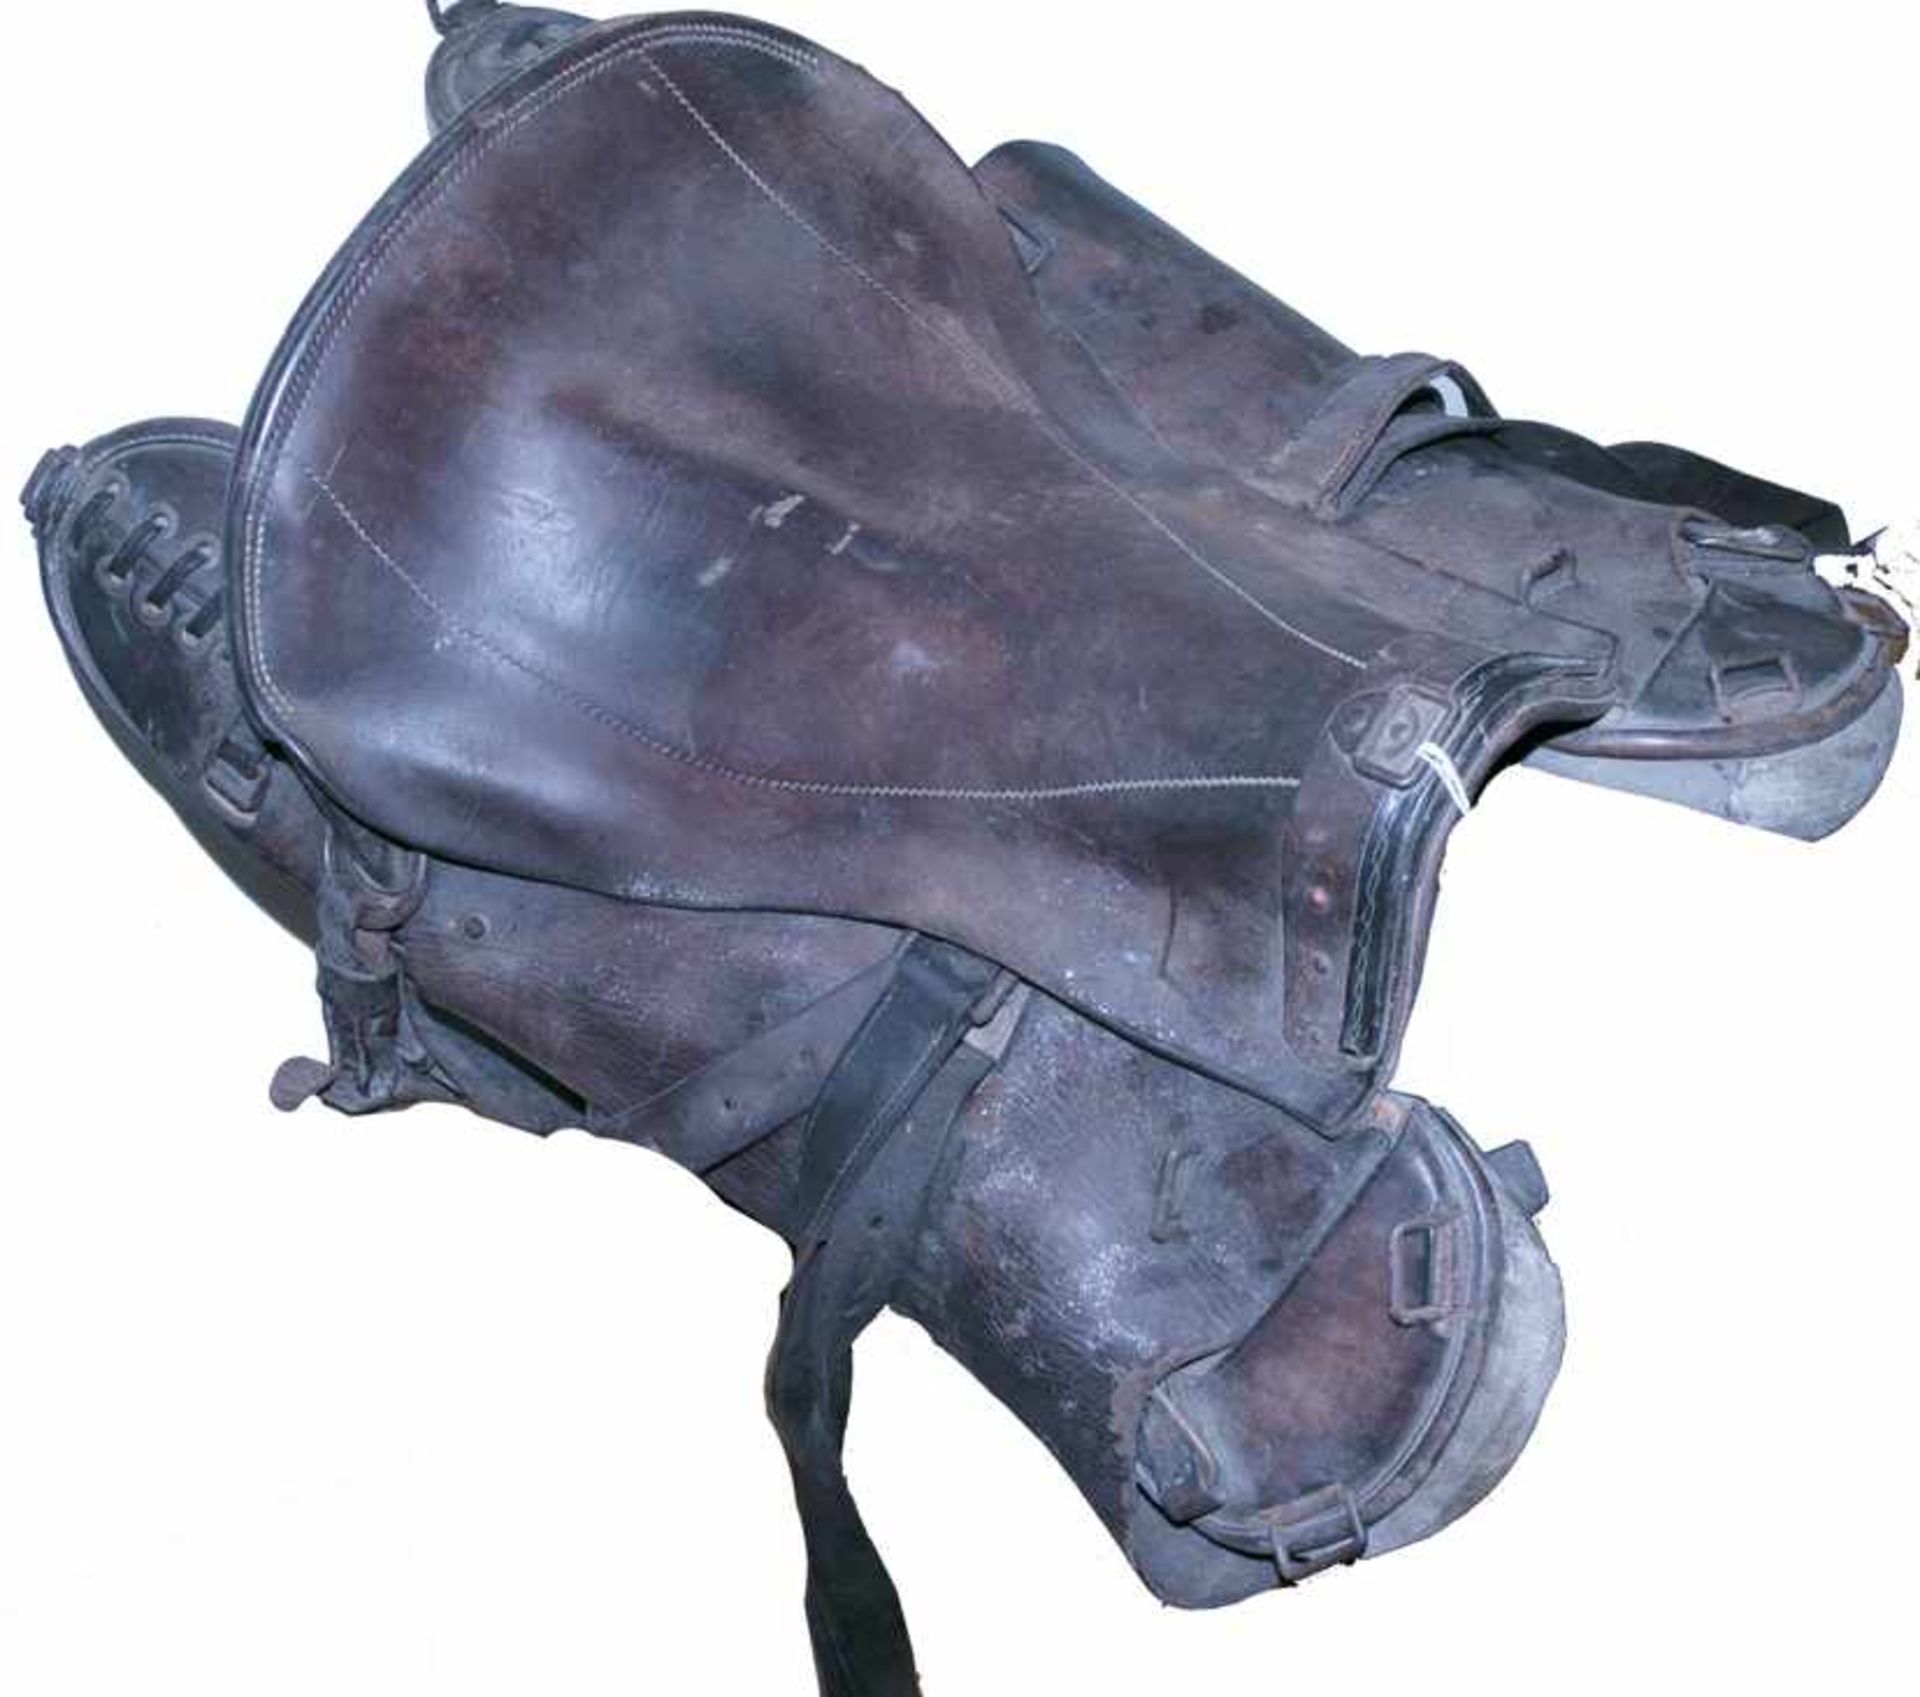 Frankrijk / France - Cavalry leather saddle, some small parts missing, leather a bit dried out